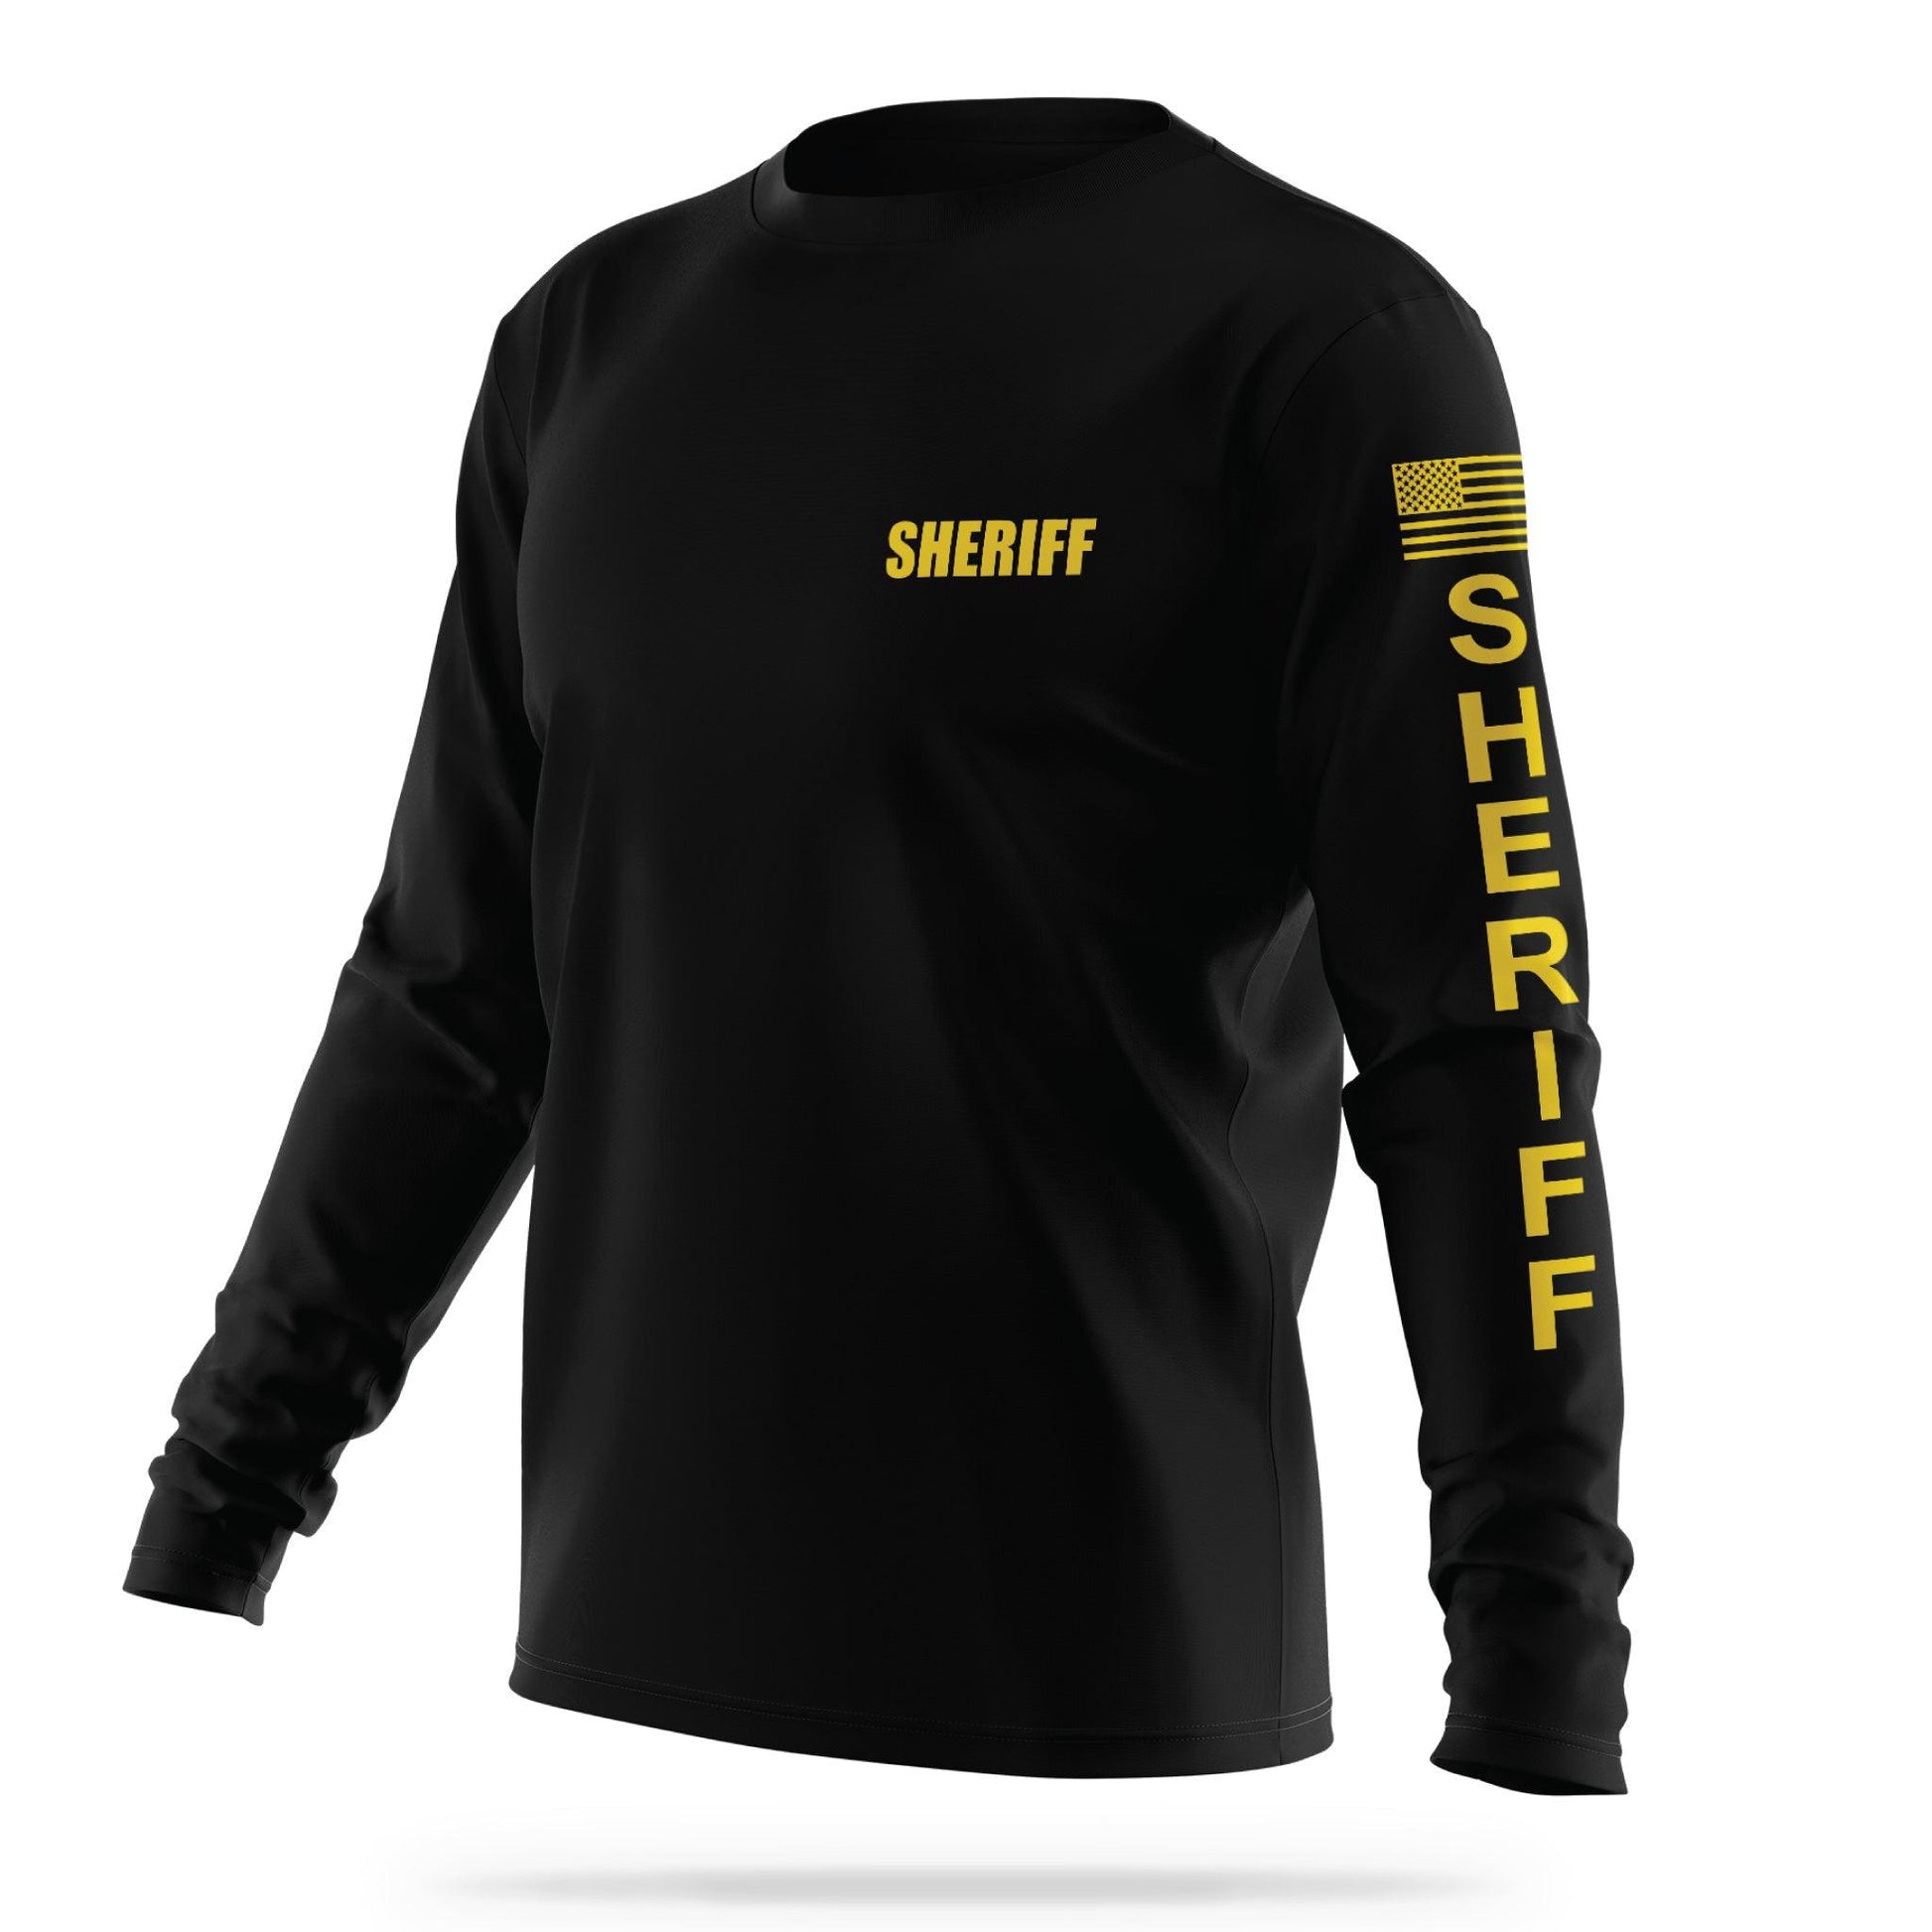 [SHERIFF] Men's Utility Long Sleeve [BLK/GLD]-13 Fifty Apparel